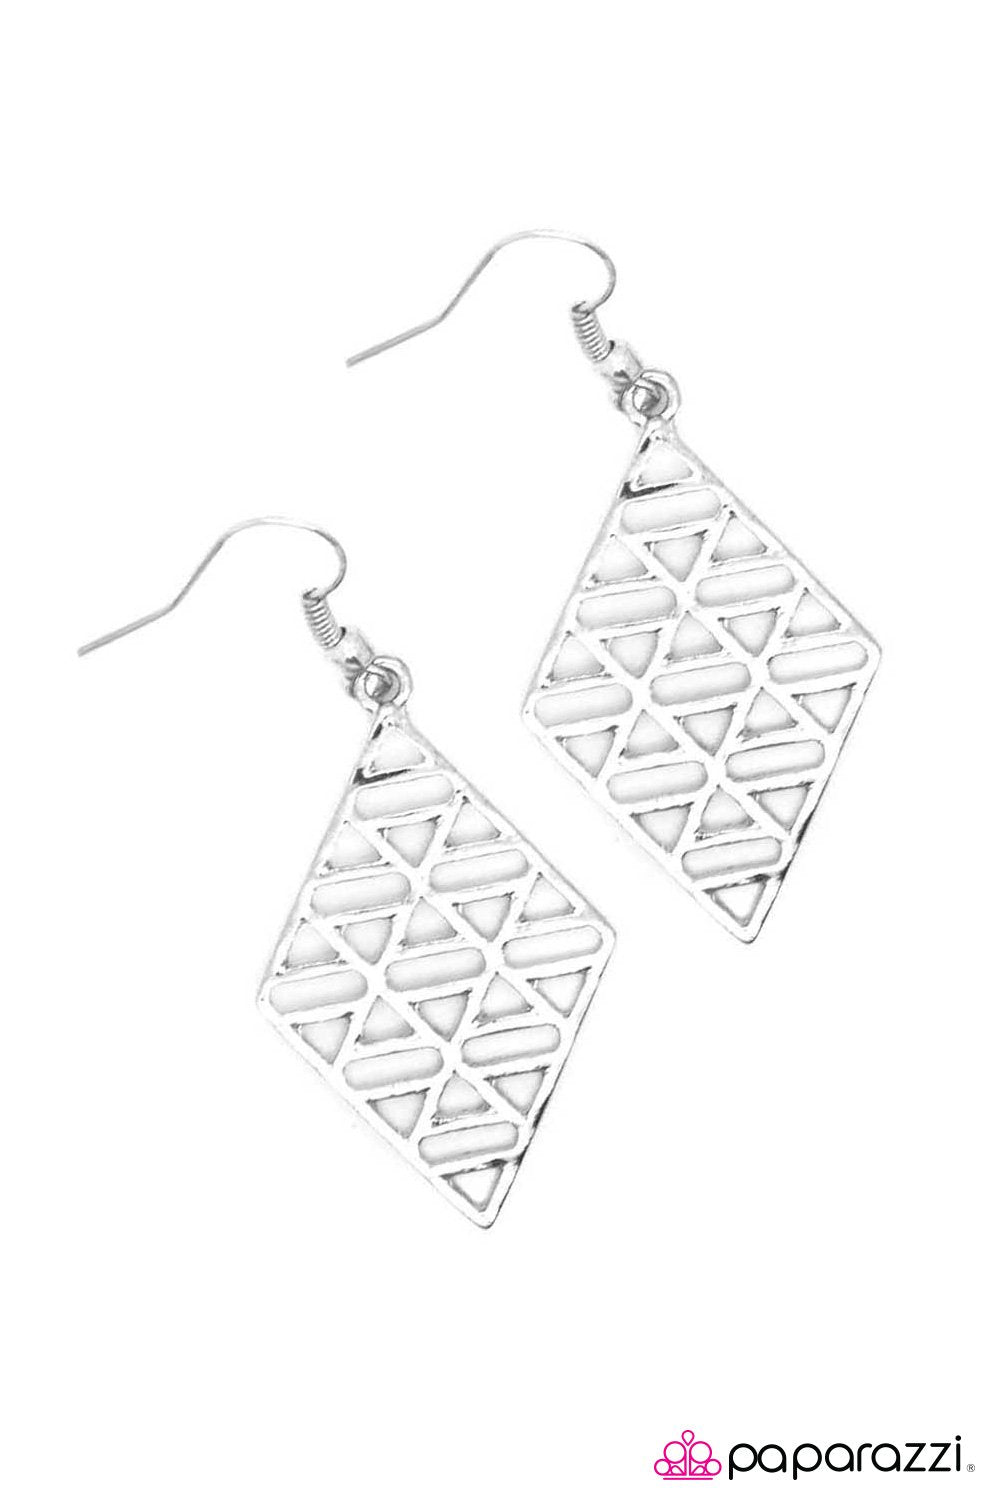 Get Your Lines Crossed Silver Earrings - Paparazzi Accessories-CarasShop.com - $5 Jewelry by Cara Jewels